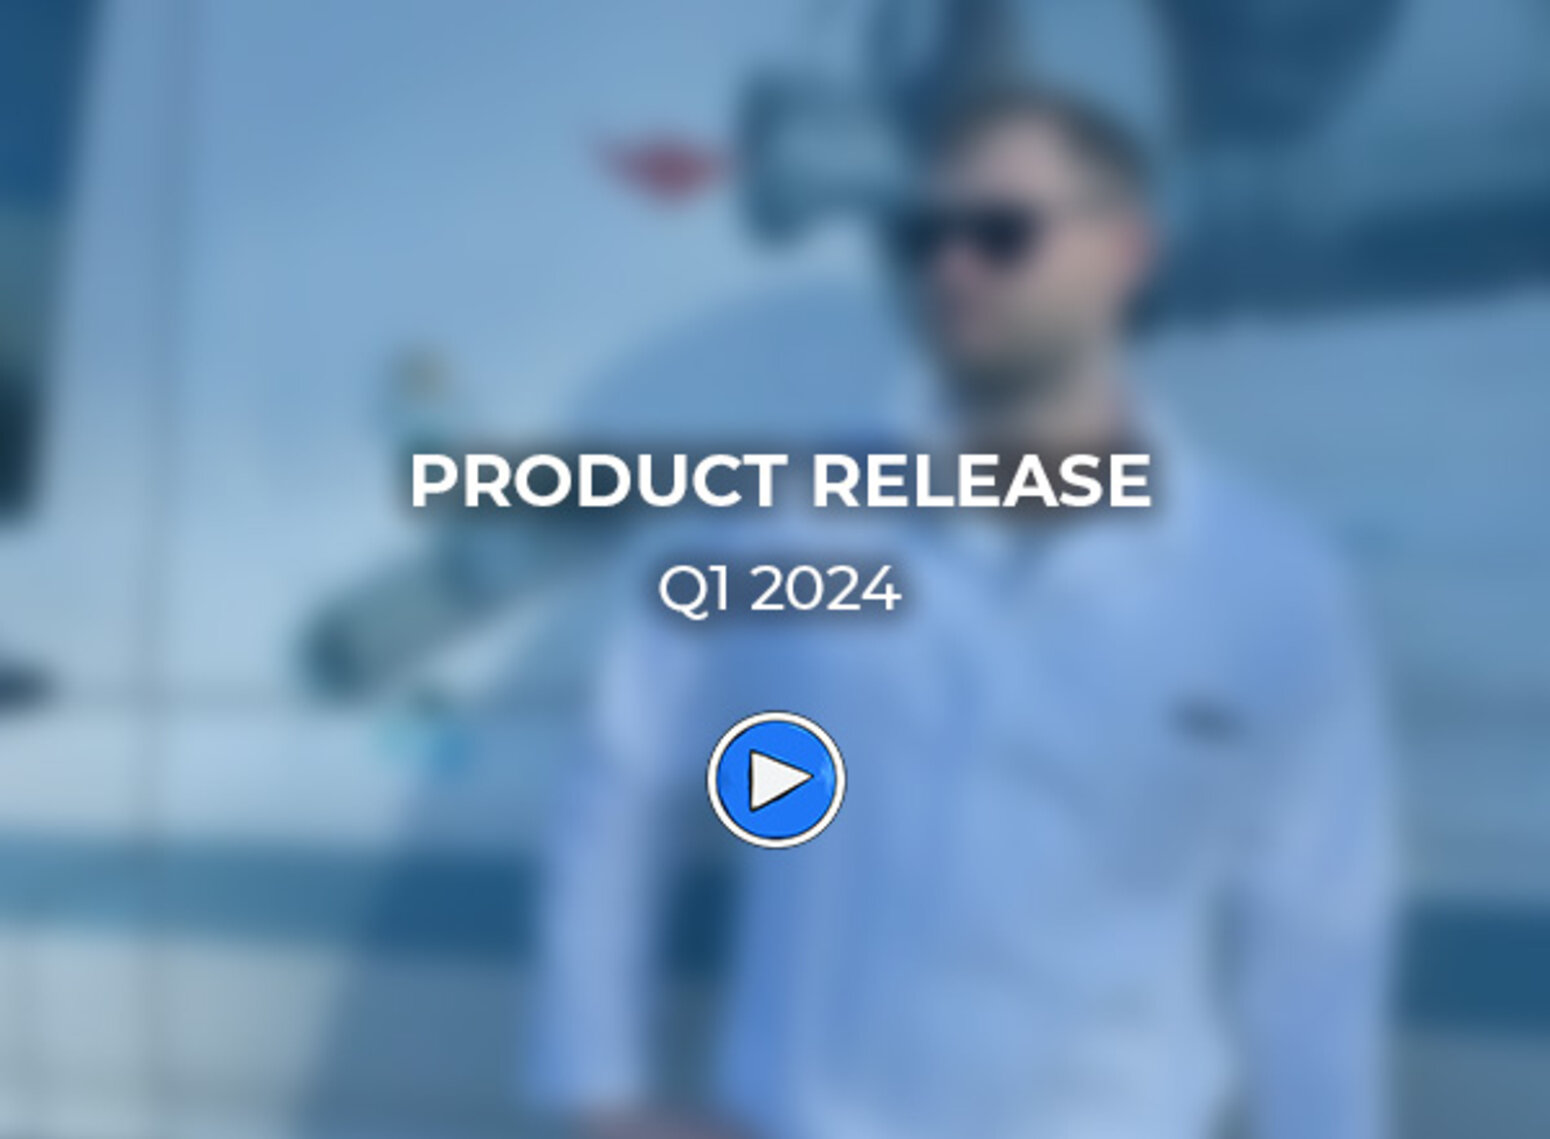 Dinex 's Q! Product Release